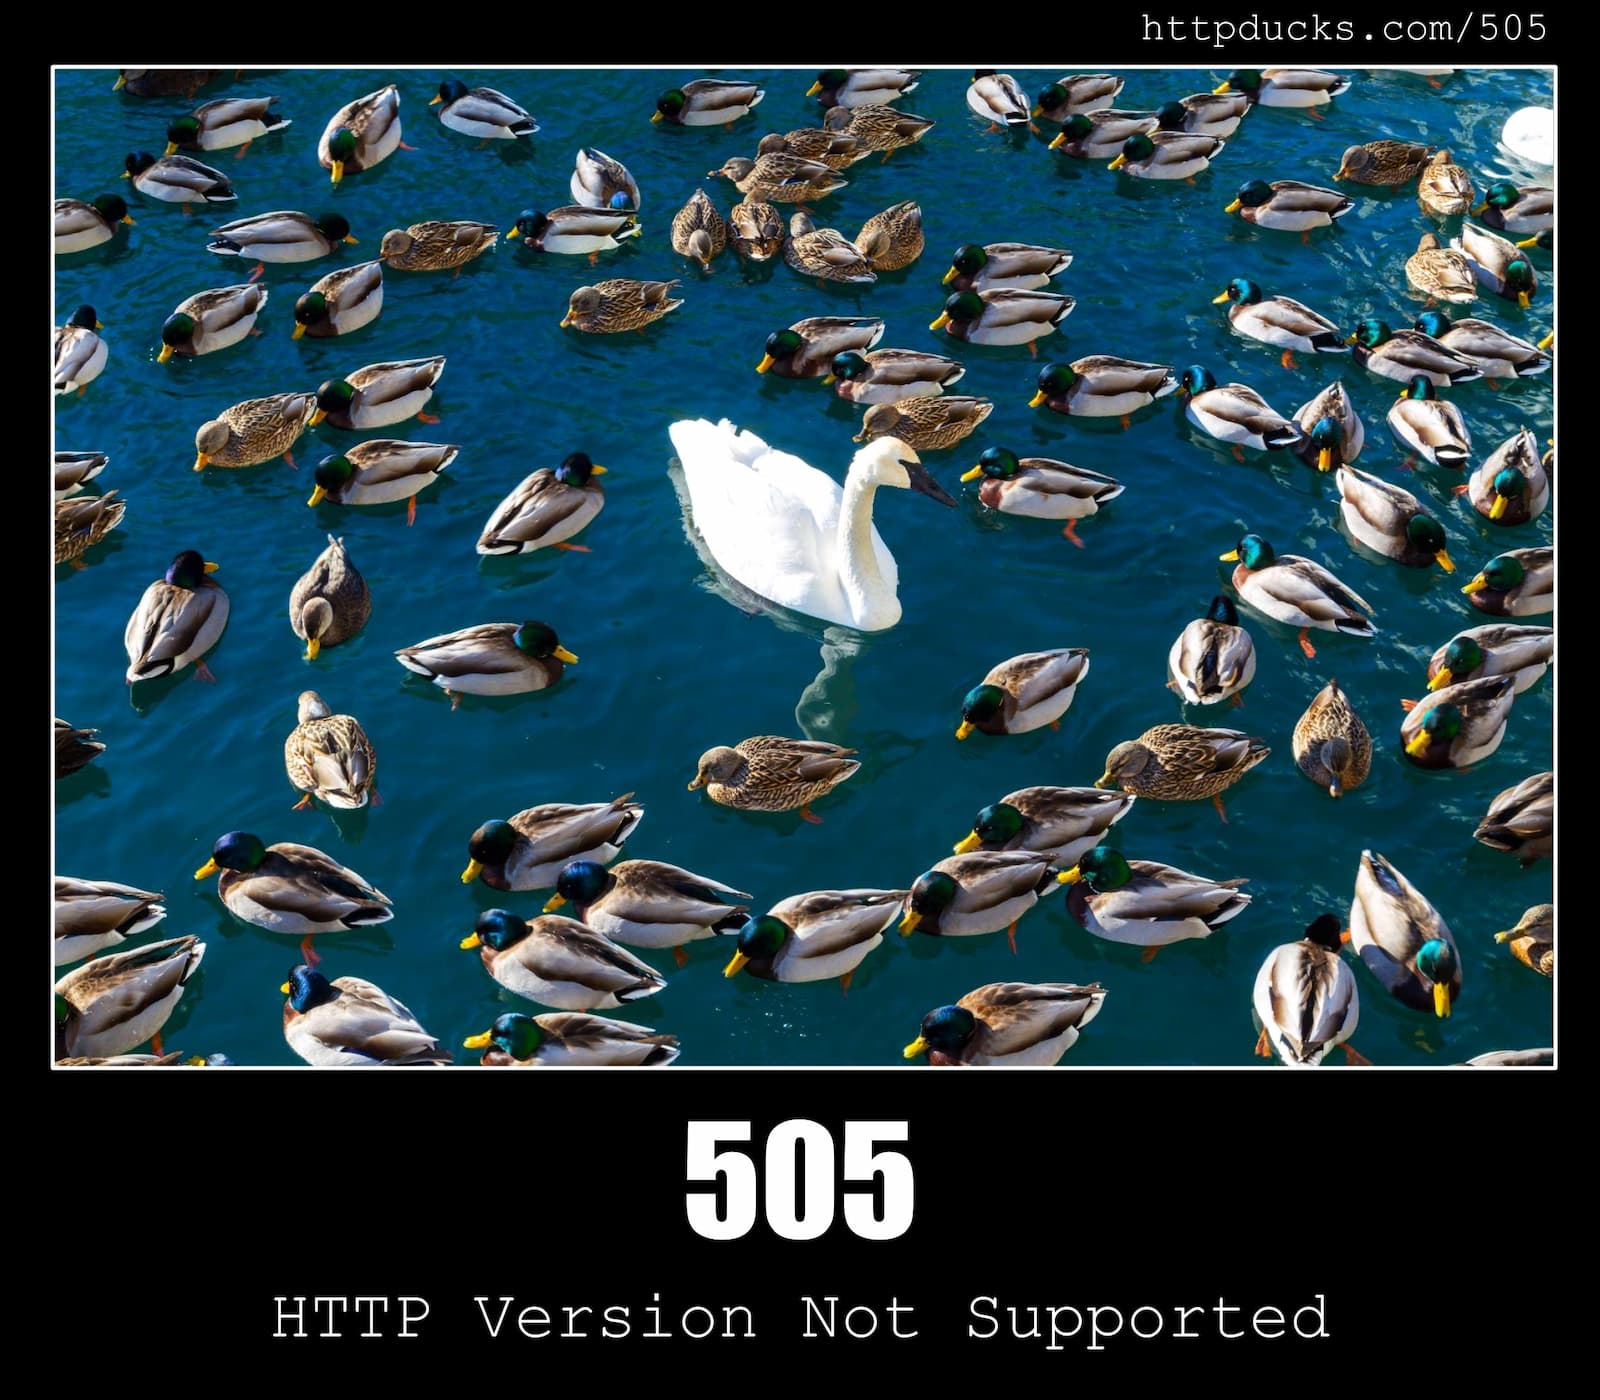 HTTP Status Code 505 HTTP Version Not Supported & Ducks